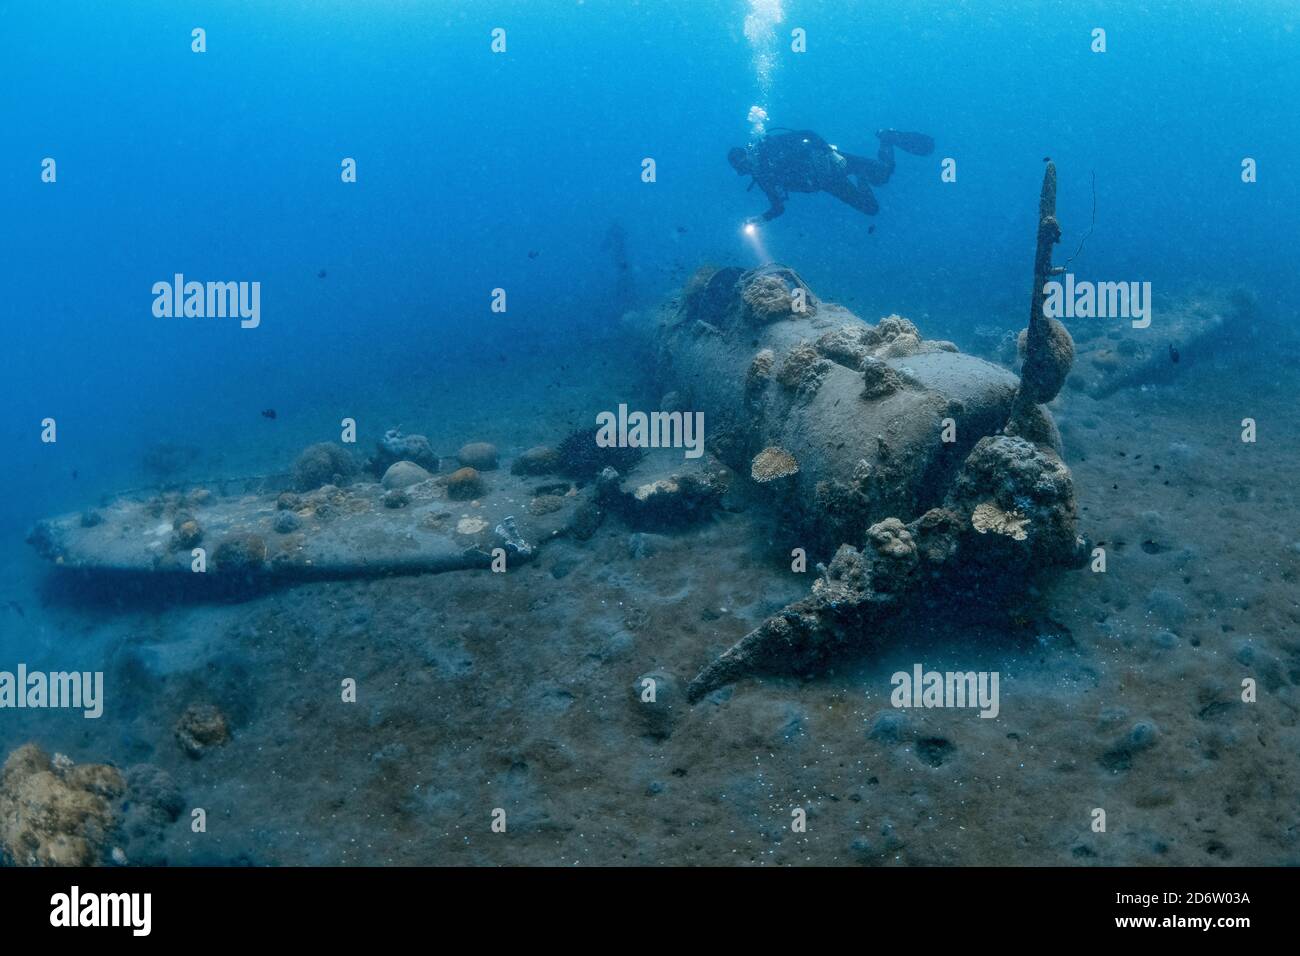 A diver investigates a Japanese Zero fighter plane that ditched in shallow water. Kimbe Bay, New Britain, Papua New Guinea, Pacific Ocean Stock Photo